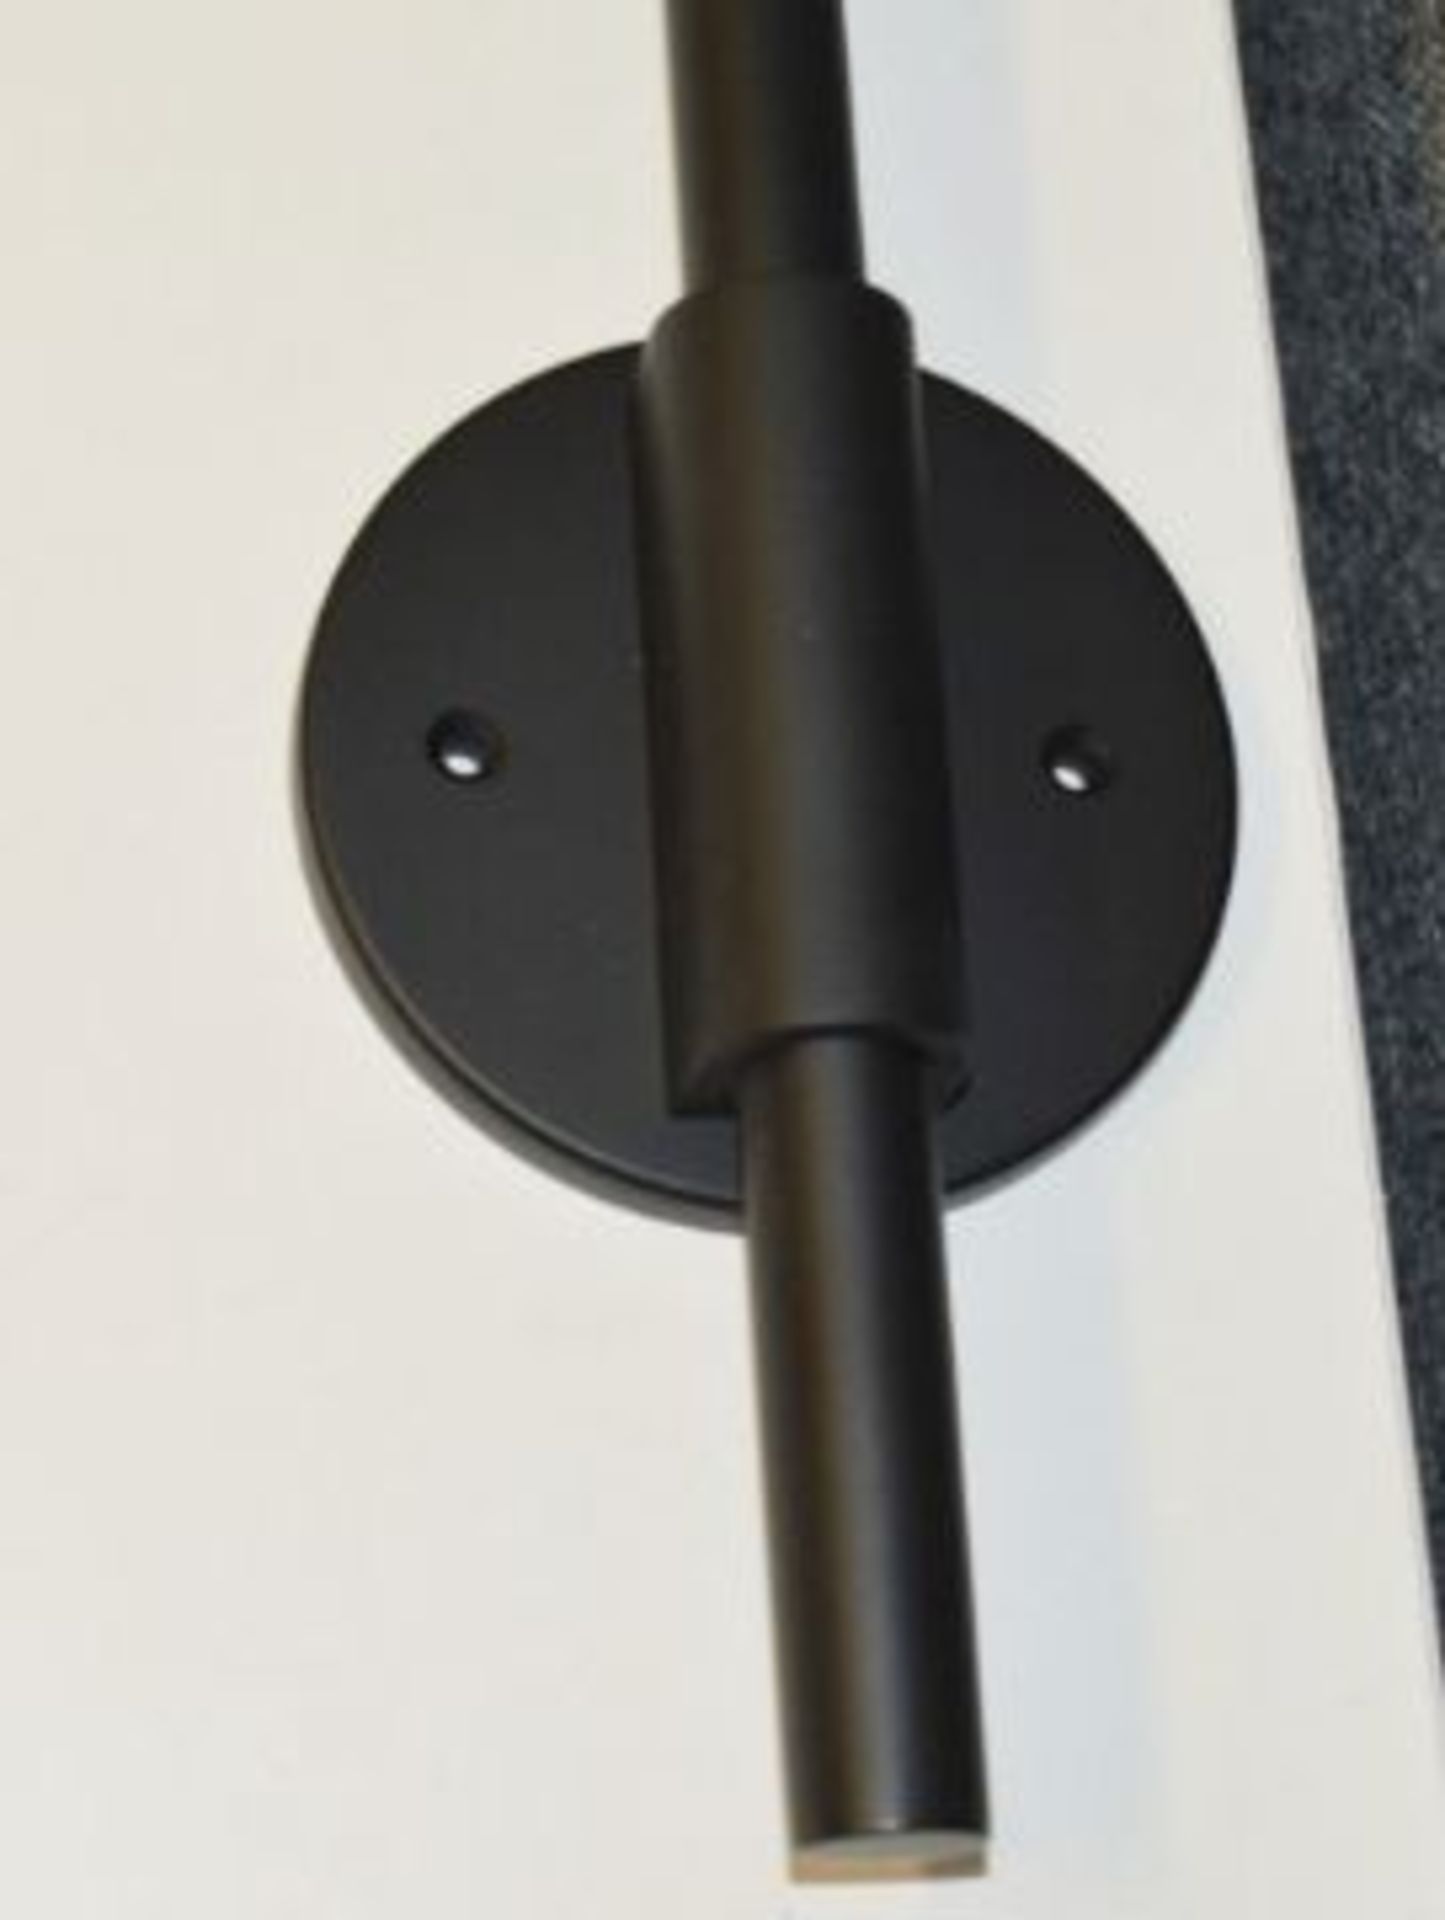 1 x CHELSOM Commercial Hotel Wall Light In A Black Powder Coated Finish - Dimensions: H86 x 40cm - Image 2 of 6